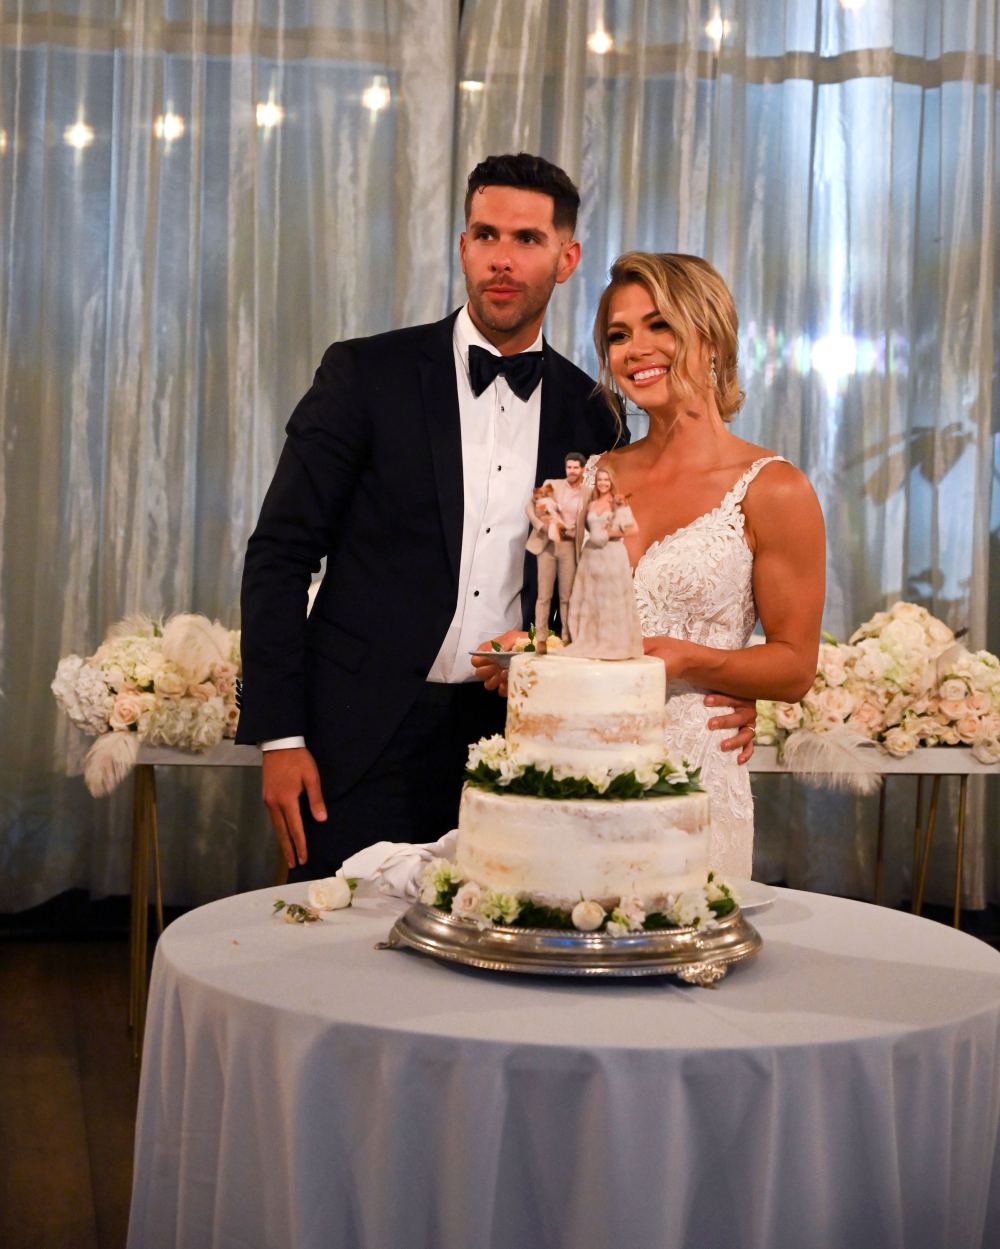 Bachelor in Paradise’s Chris Randone and Krystal Nielson Explain Why They Wed on TV